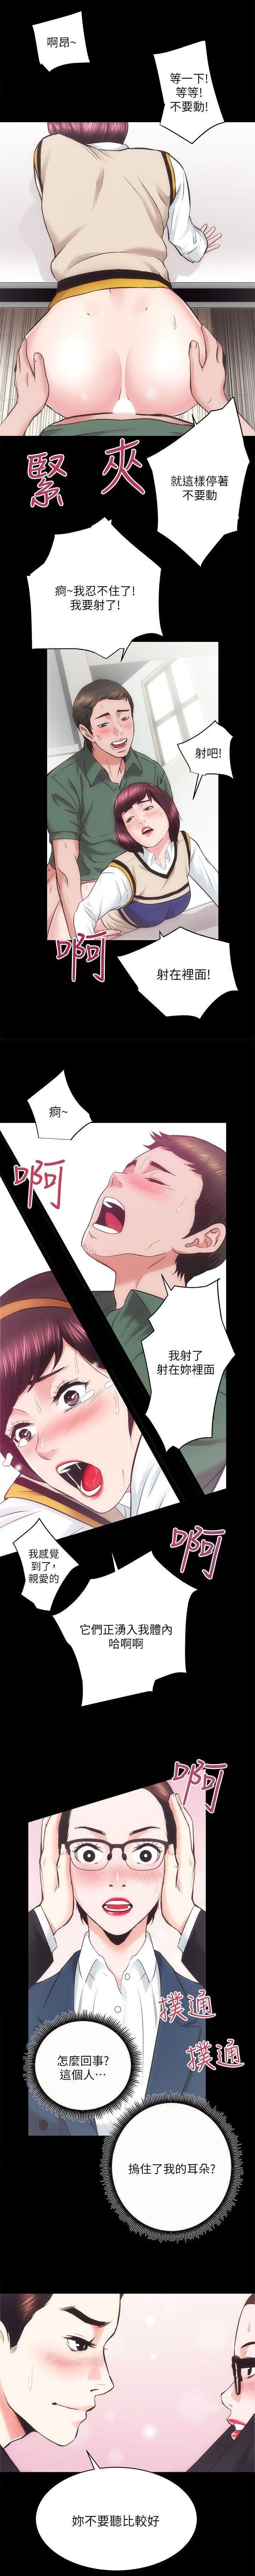 Gay Medical 性溢房屋 Chapter 17-20 Facials - Page 7